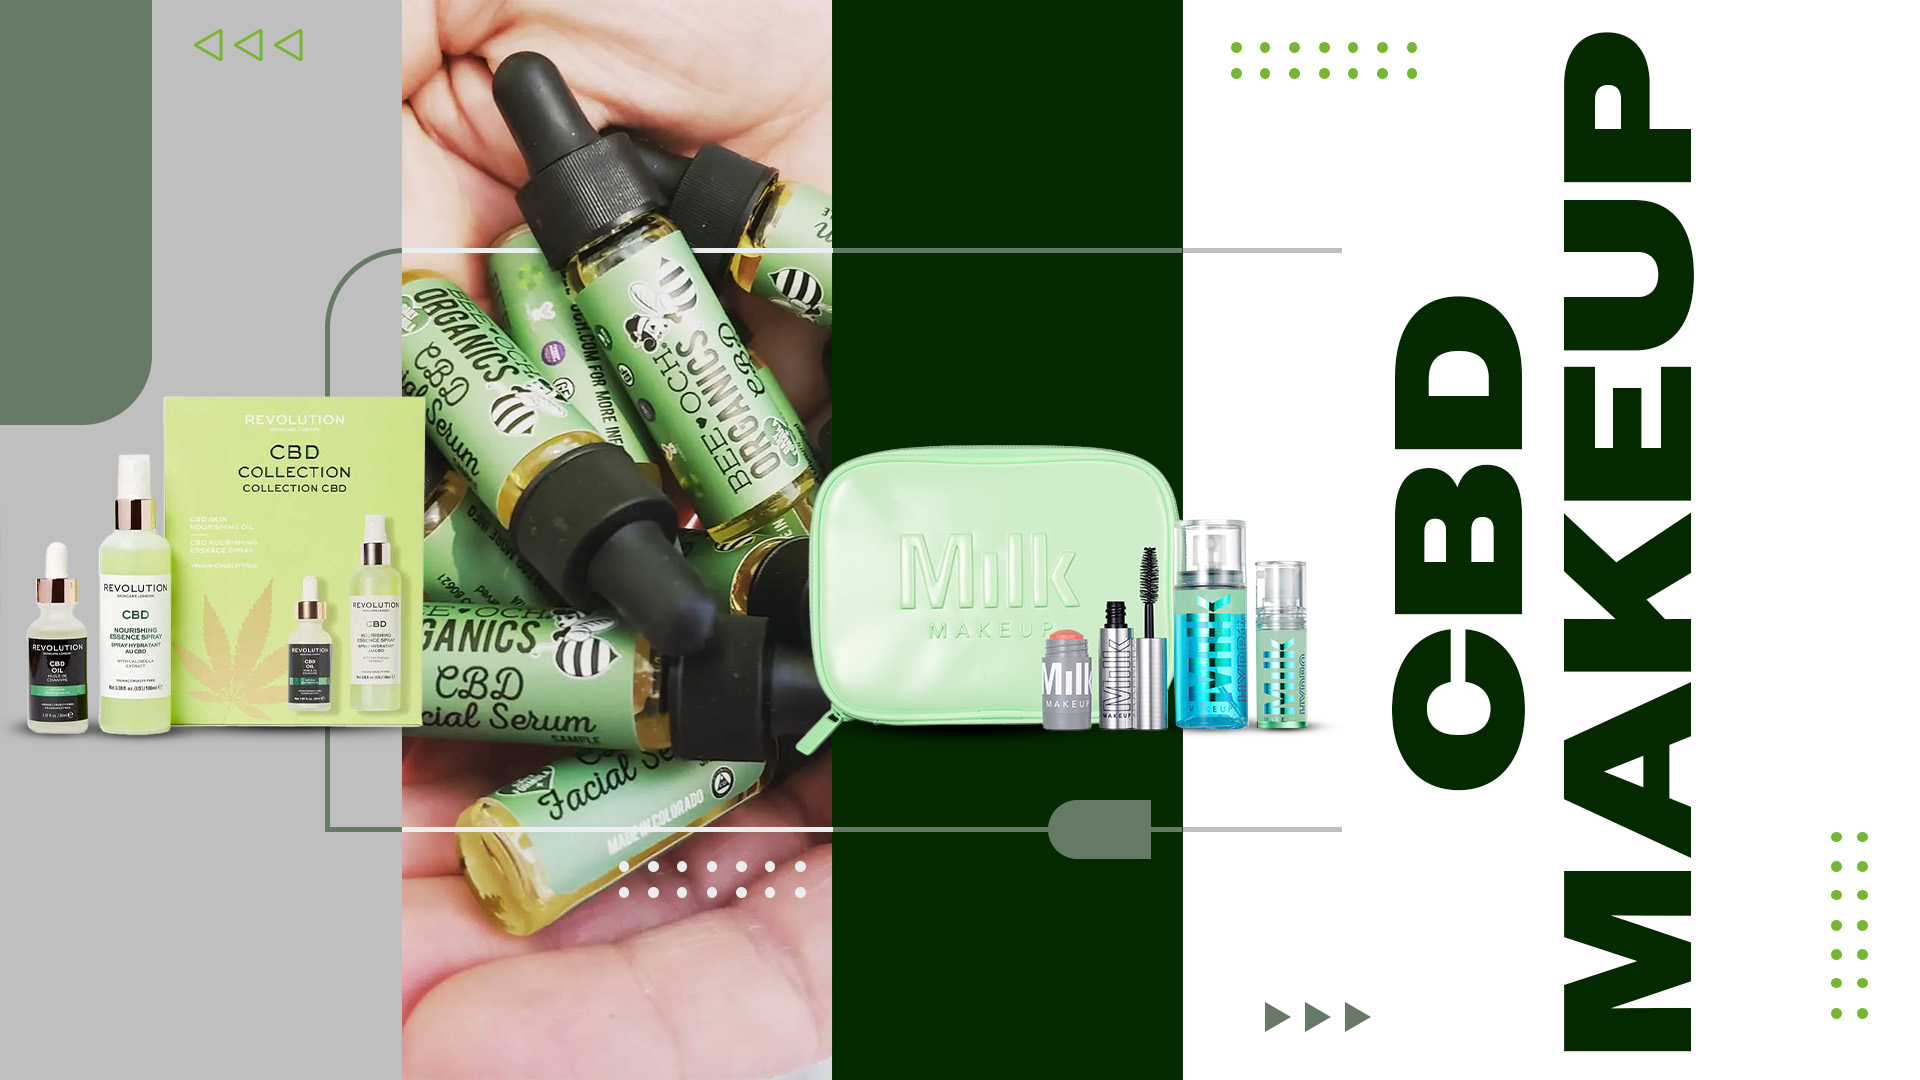 More Than Pain-Relief: CBD in Makeup